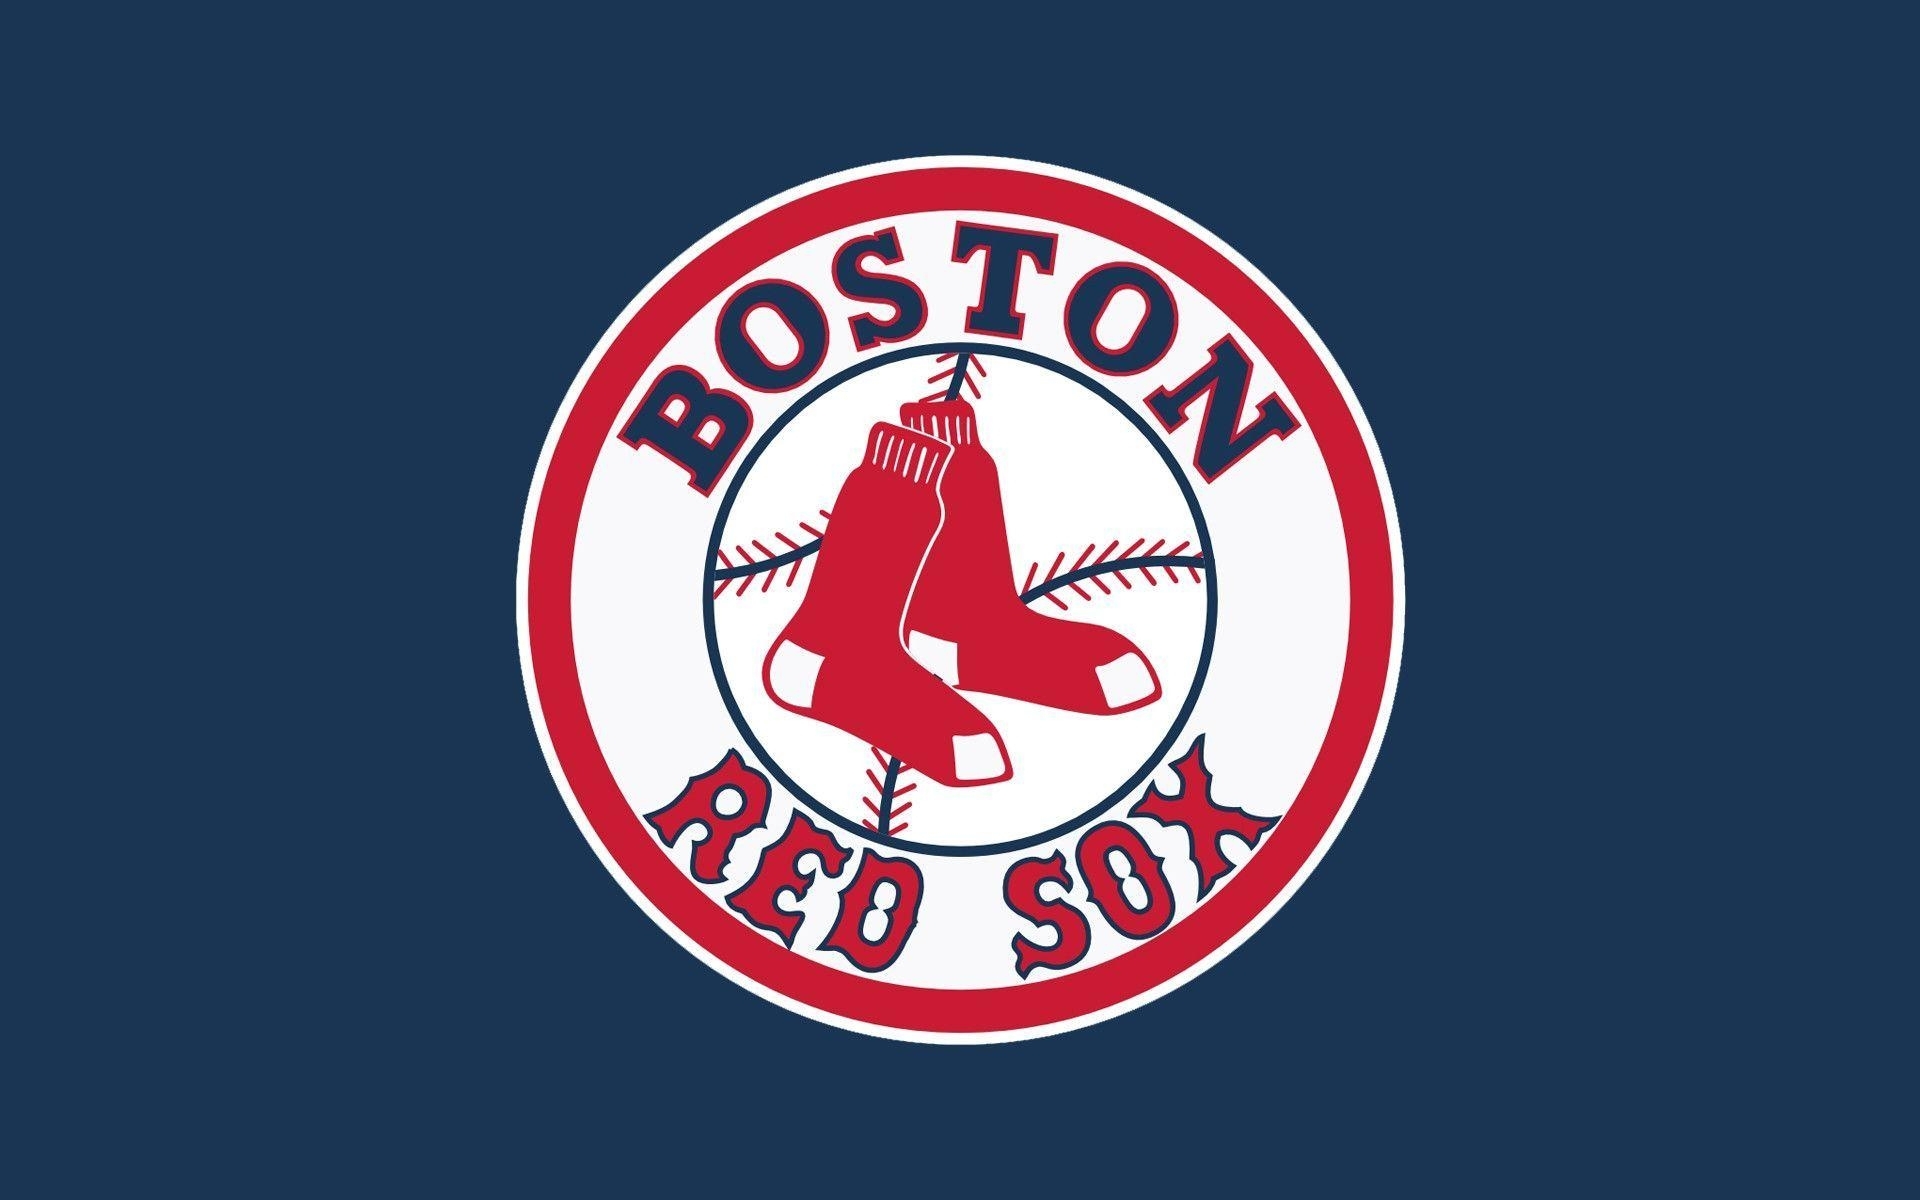 10 Latest Boston Red Sox Wallpaper Hd FULL HD 1080p For PC Background